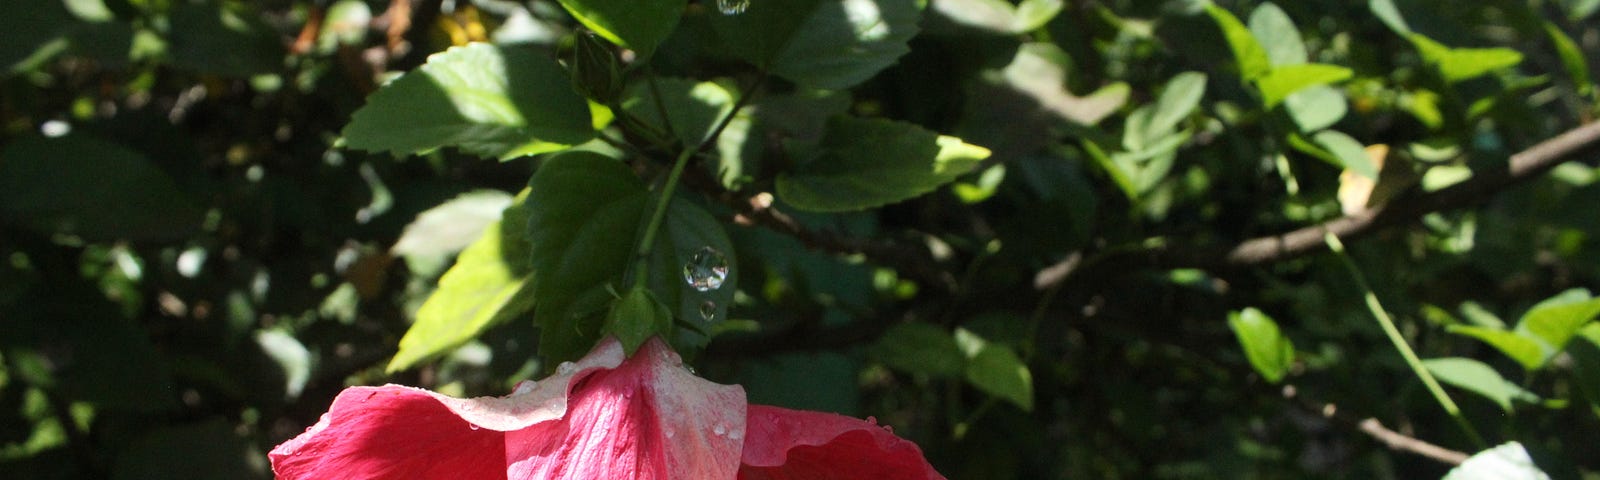 Flower Poetry: An inspiration poem about the flower Hibiscus